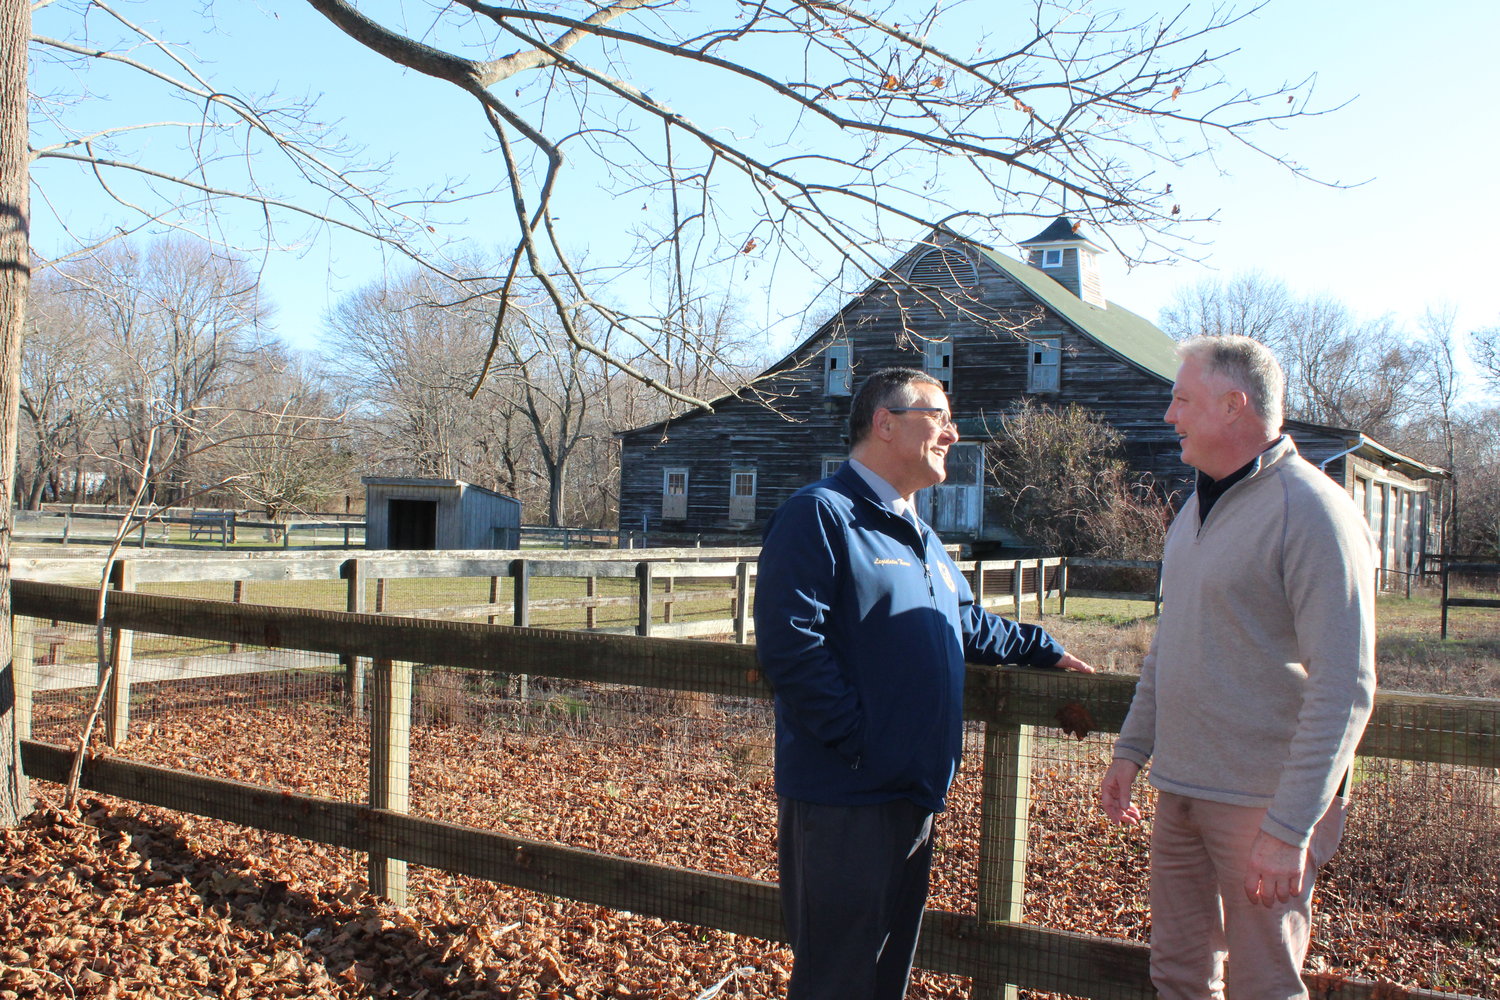 Legis. Dominick Thorne and Brookhaven councilman Neil Foley have been collaborating on the preservation of the Avery property. The 92-year-old barn in the background has attracted interest from Lessing’s.